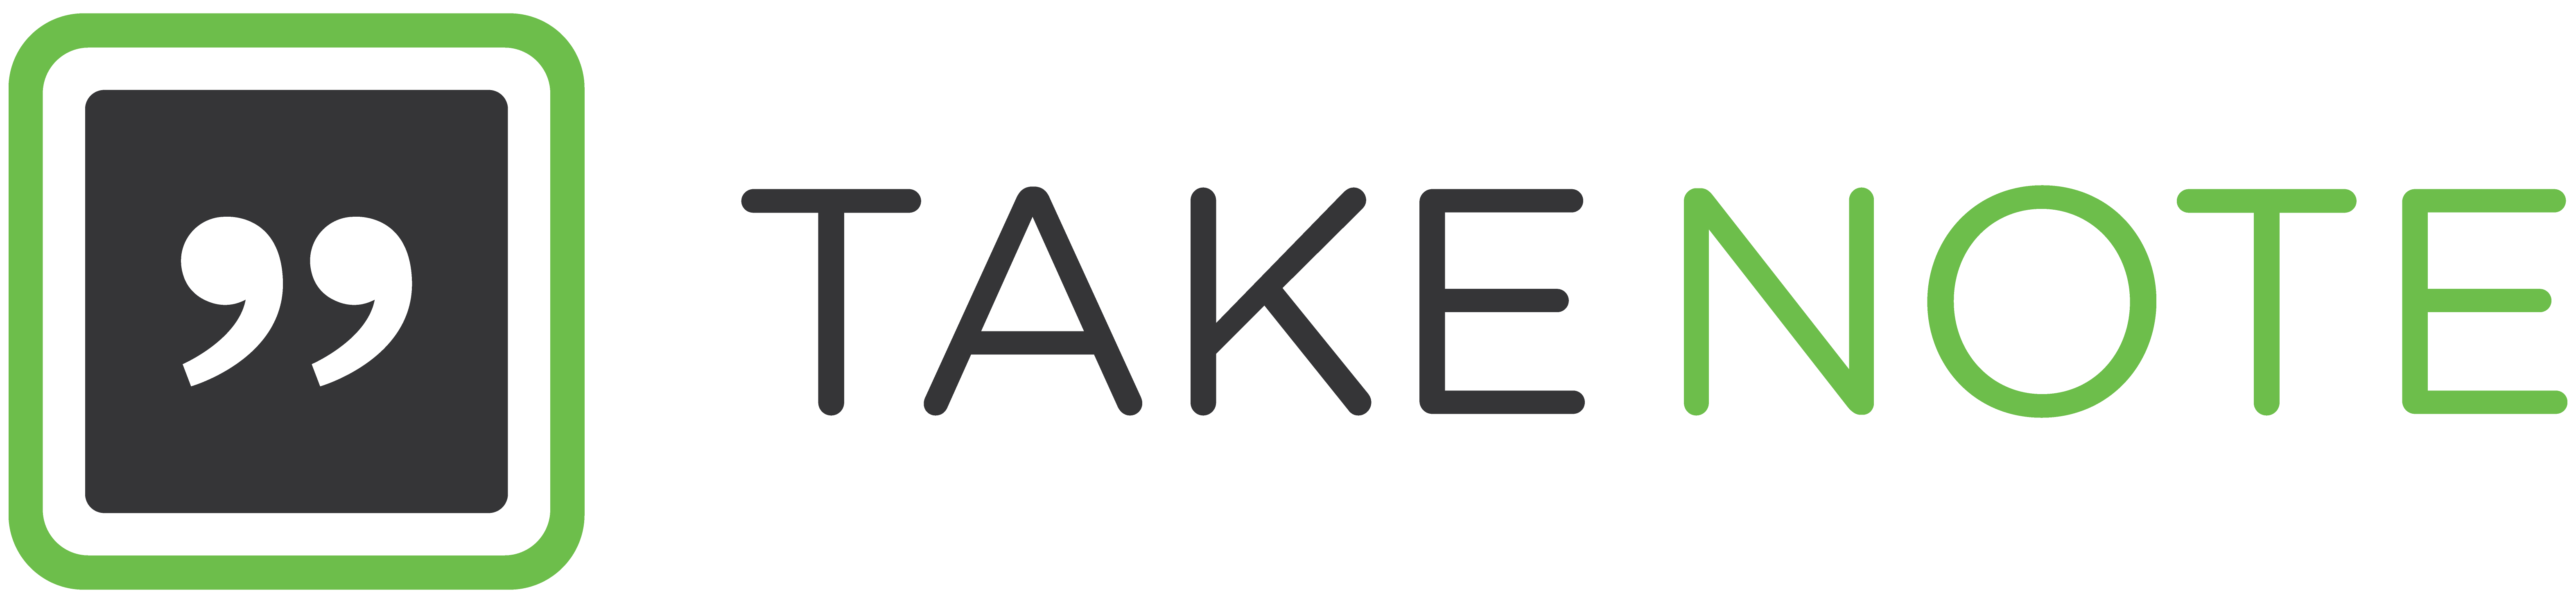 https://takenote.co/wp-content/uploads/2019/11/TakeNote_Logo_Remade-01.png